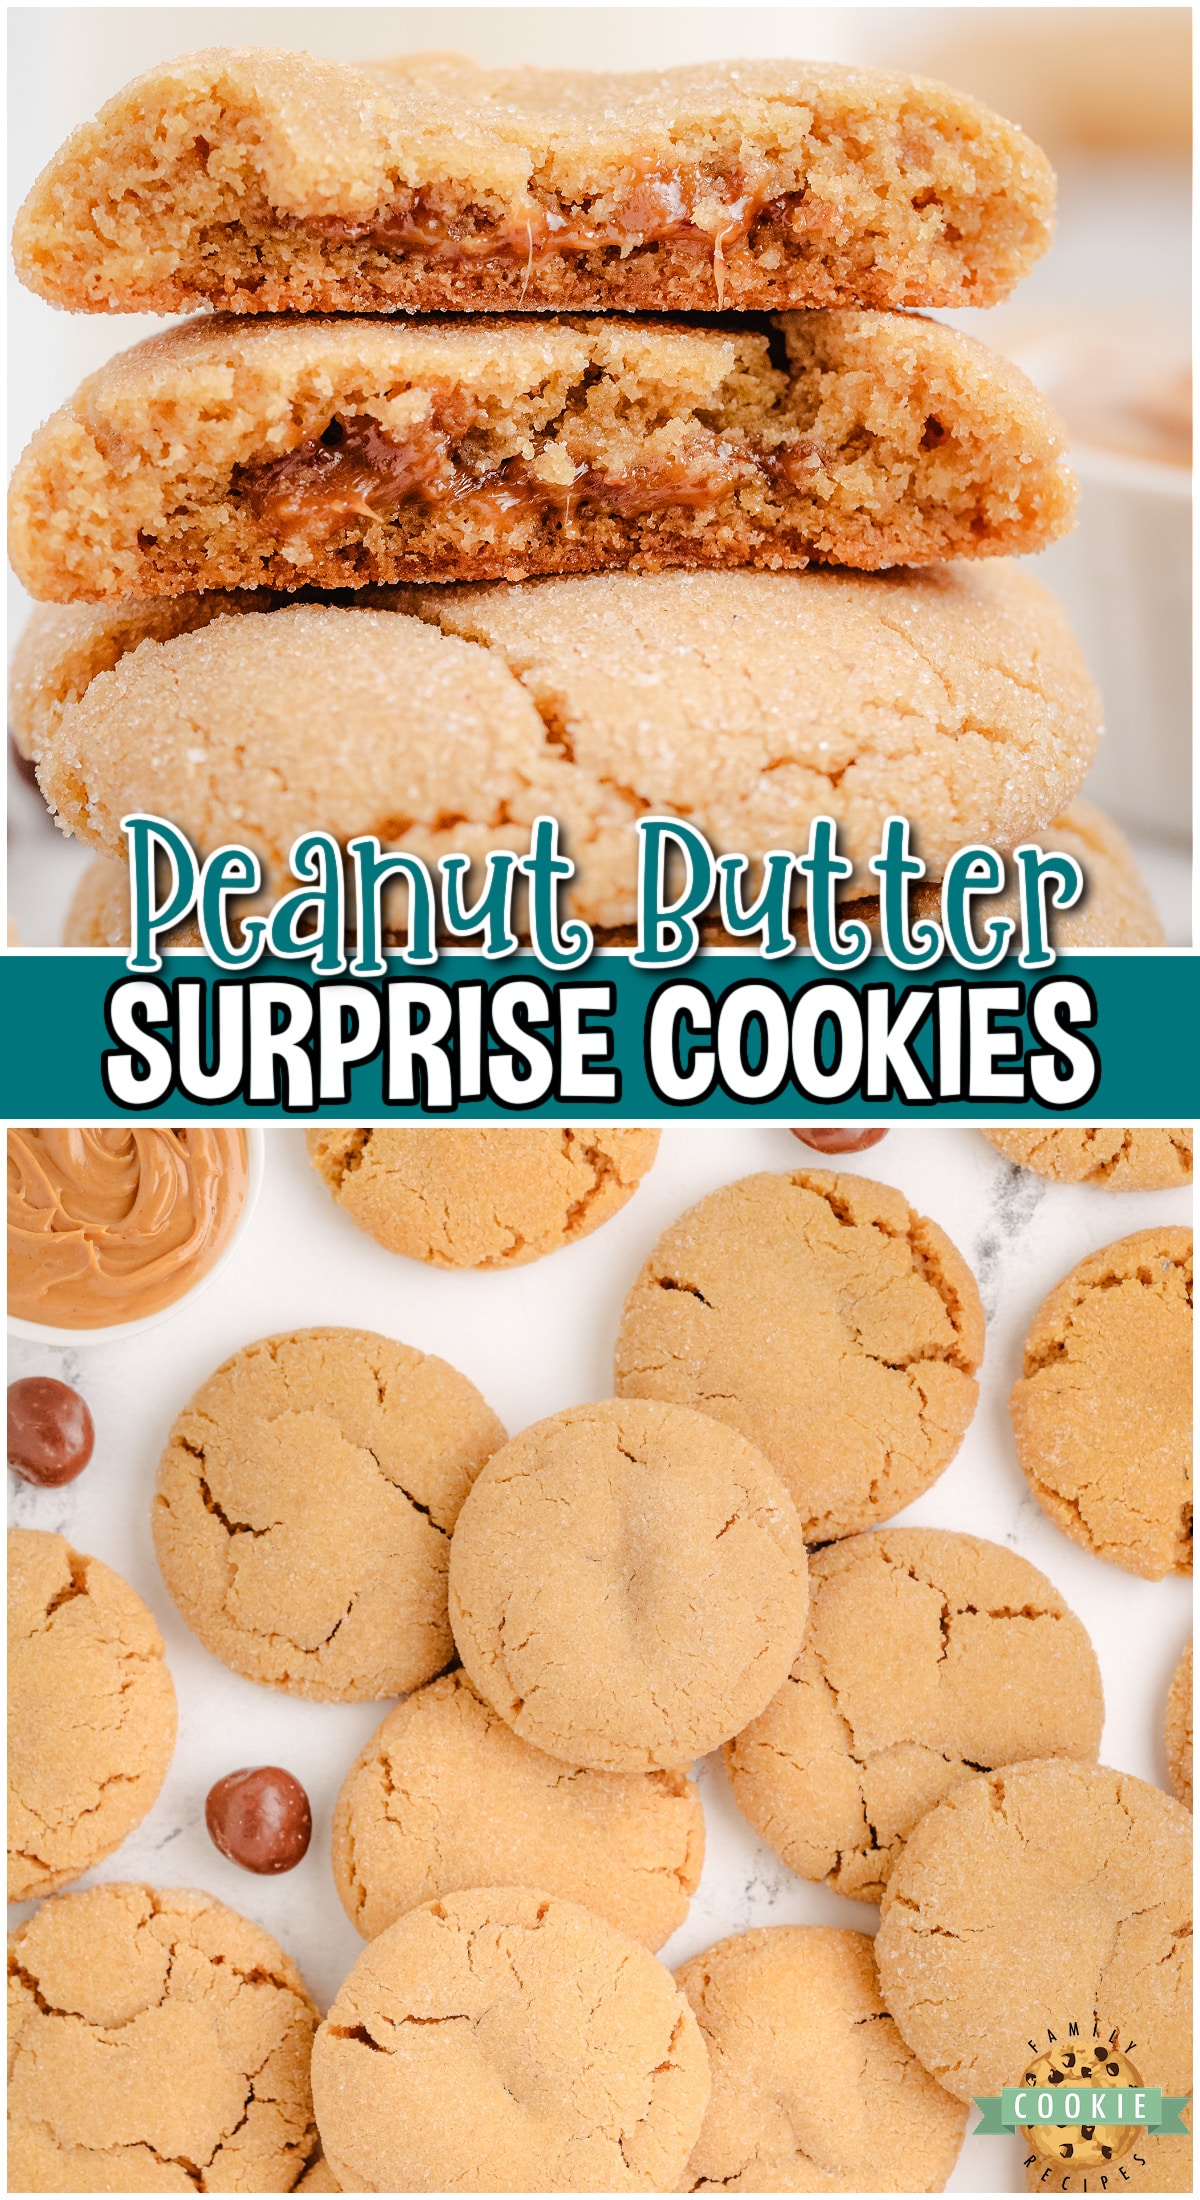 Peanut Butter Surprise Cookies are soft and chewy with a surprise caramel center! The peanut butter and caramel combo is heavenly & simple thanks to Milk Duds! 